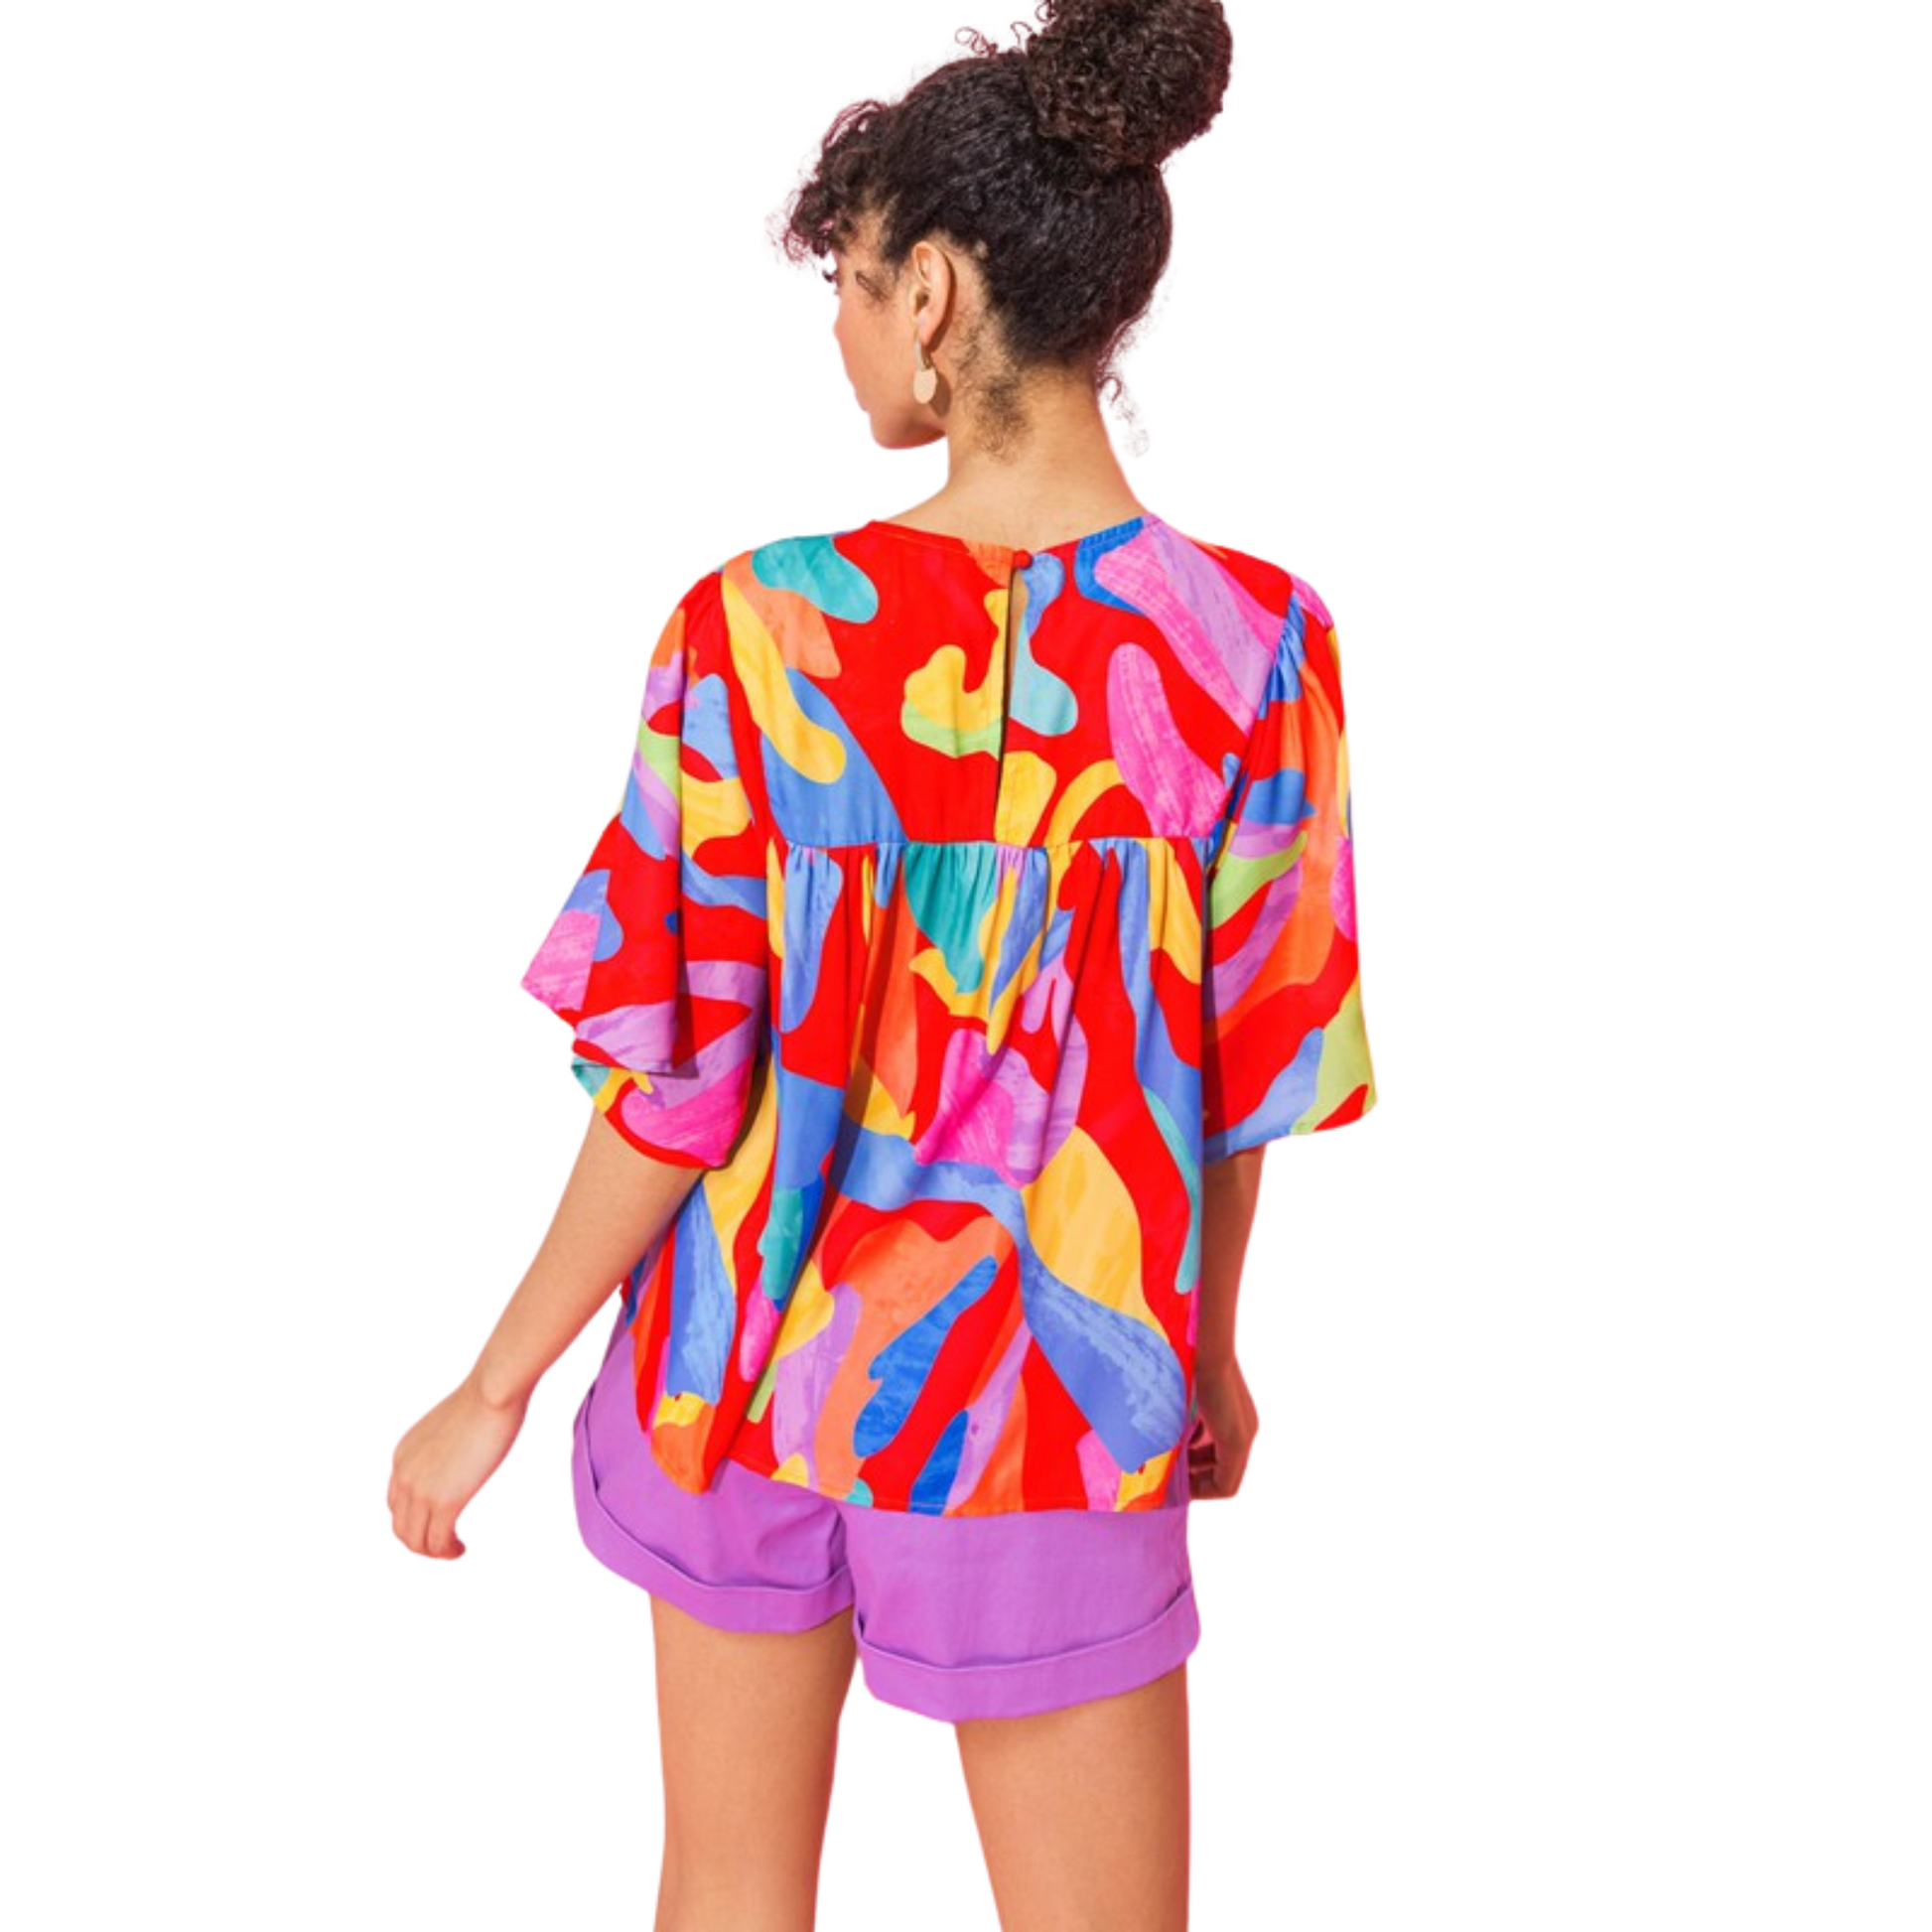 A printed woven top featuring round neckline, square yoke,&nbsp;short flutter sleeve and back neck button closure 